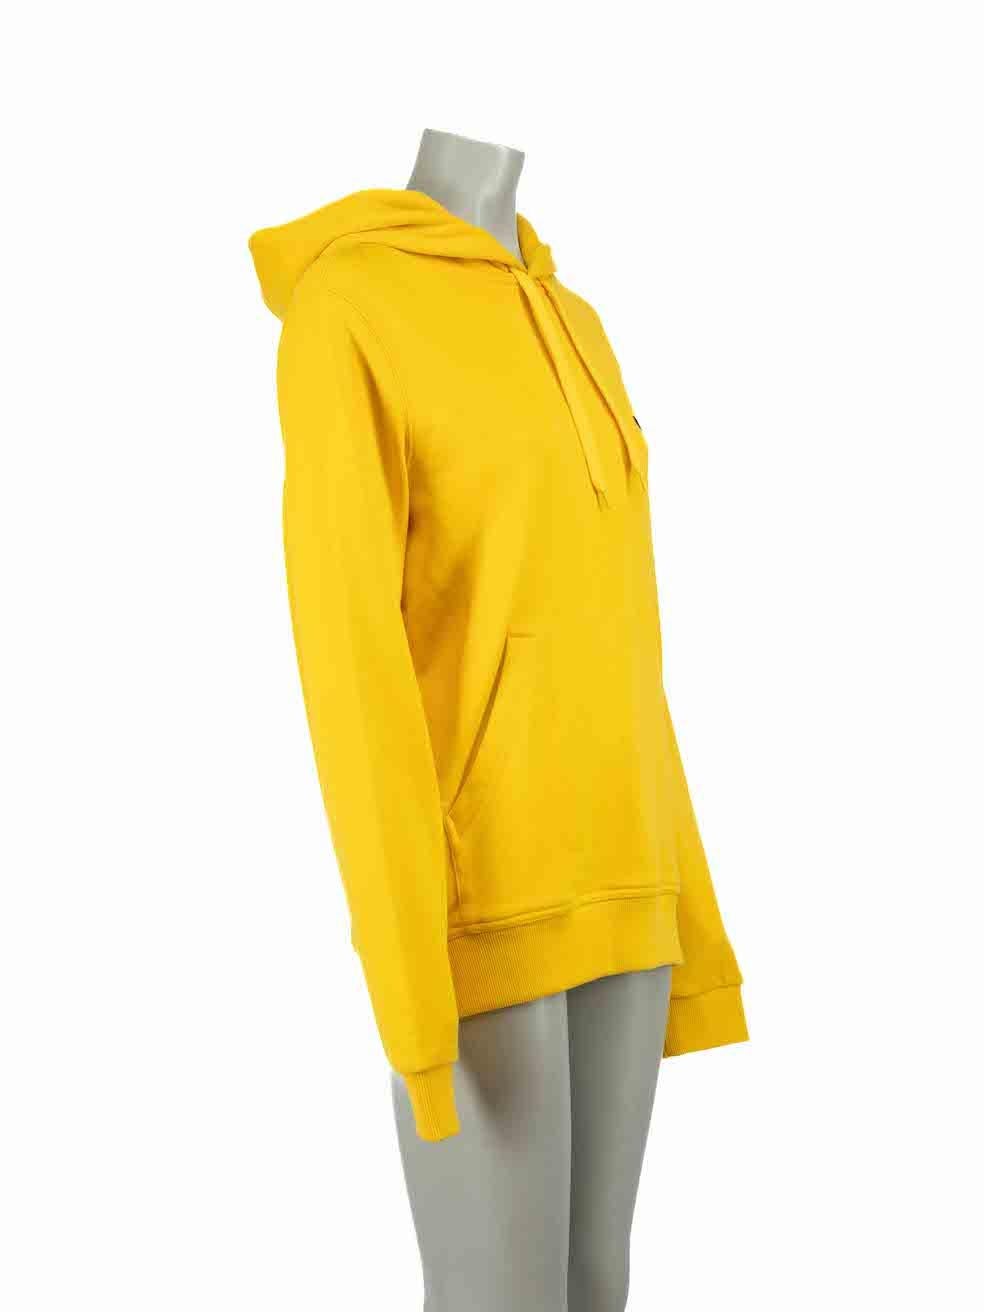 CONDITION is Never worn, with tags. No visible wear to hoodie is evident on this new Burberry designer resale item.
 
Details
Yellow
Cotton
Hoodie
Oversized fit
Drawstring hood
Front pouch pocket

Made in China
 
Composition
100% Cotton
 
Care